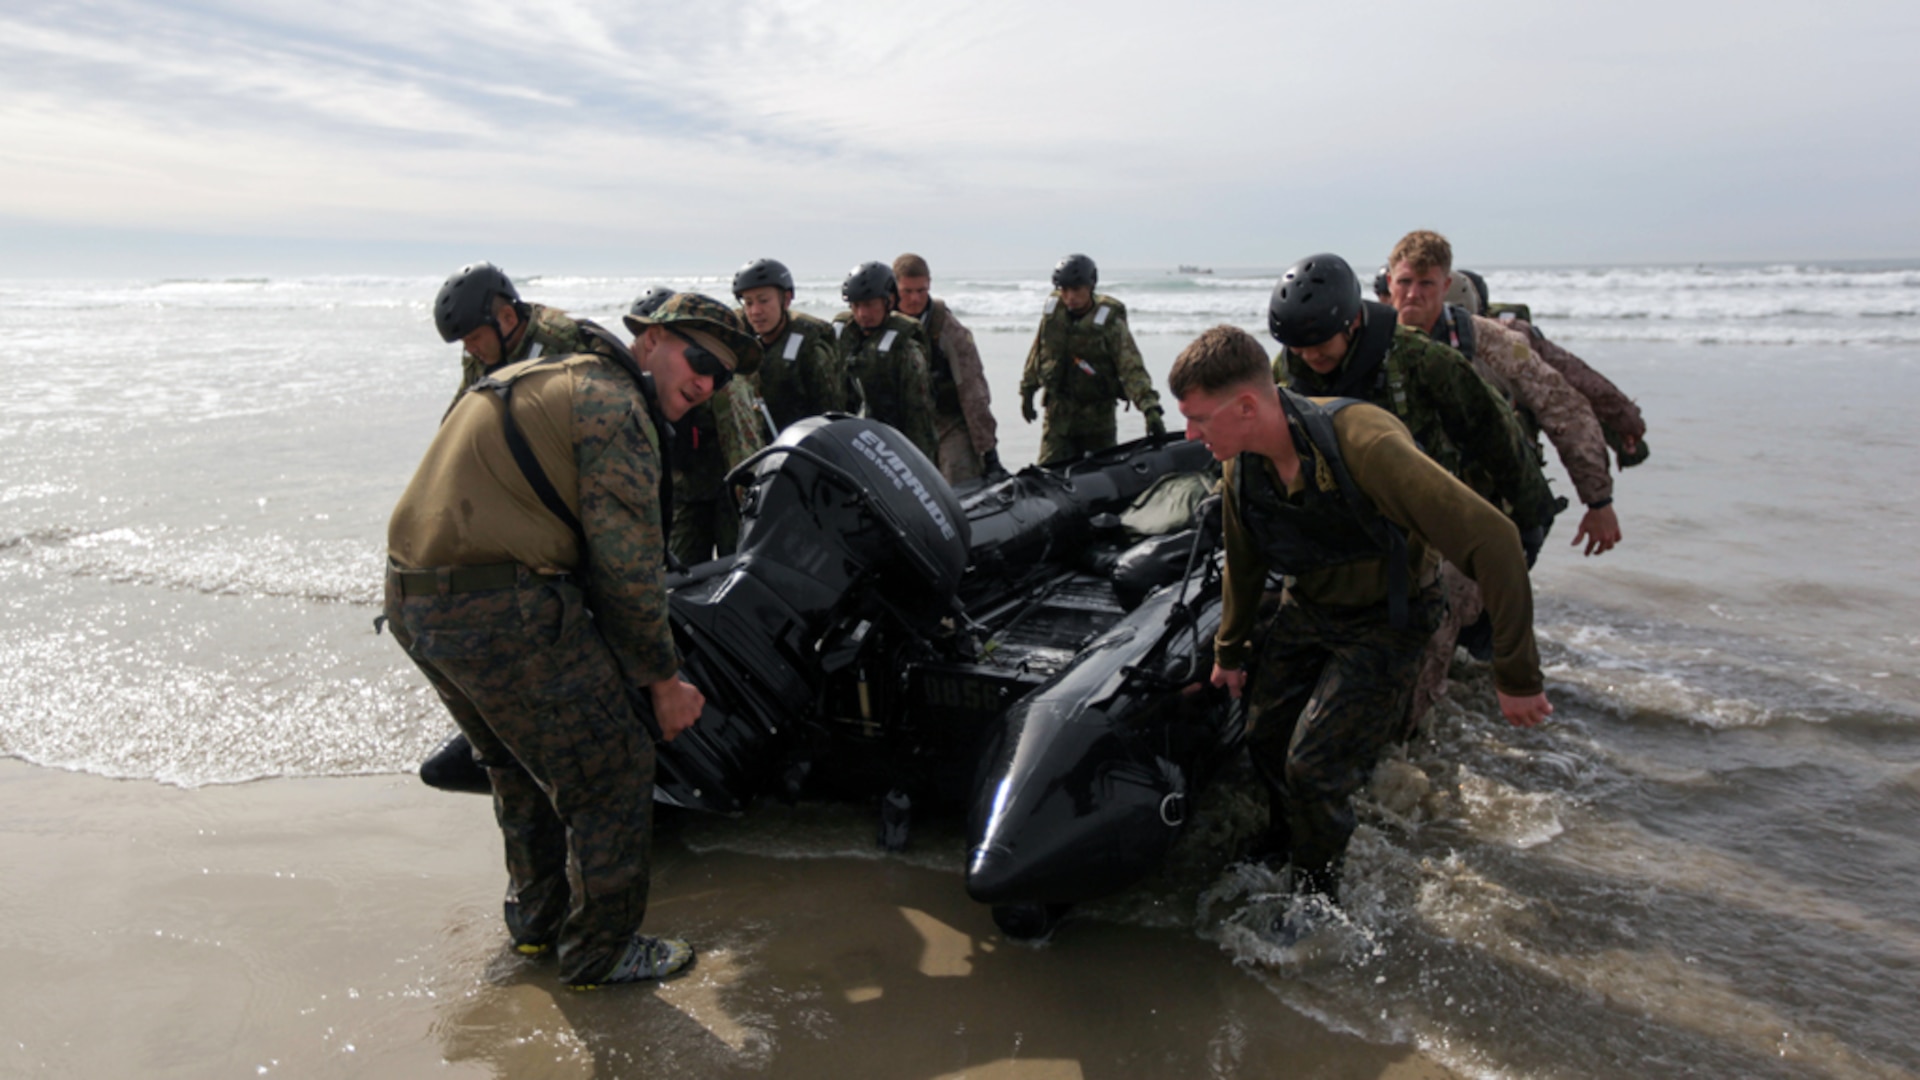 CAMP PENDLETON, California (Jan. 28, 2015) - Marines with 1st Reconnaissance Battalion, 1st Marine Division, teach Basic Maneuver Techniques for the Combat Rubber Raiding Craft to members of the Japan Ground Self-Defense Force during Exercise Iron Fist 2015 to help develop the Self-Defense Force's understanding of amphibious operations. Exercise Iron Fist 15 is an annual bilateral training exercise between U.S. and Japanese military forces that builds their combined ability to conduct amphibious and land-based contingency operations. IF15, currently in its tenth iteration, is scheduled from Jan. 26 to Feb. 27, 2015, in southern California.  150128-M-BL930-511.JPG 